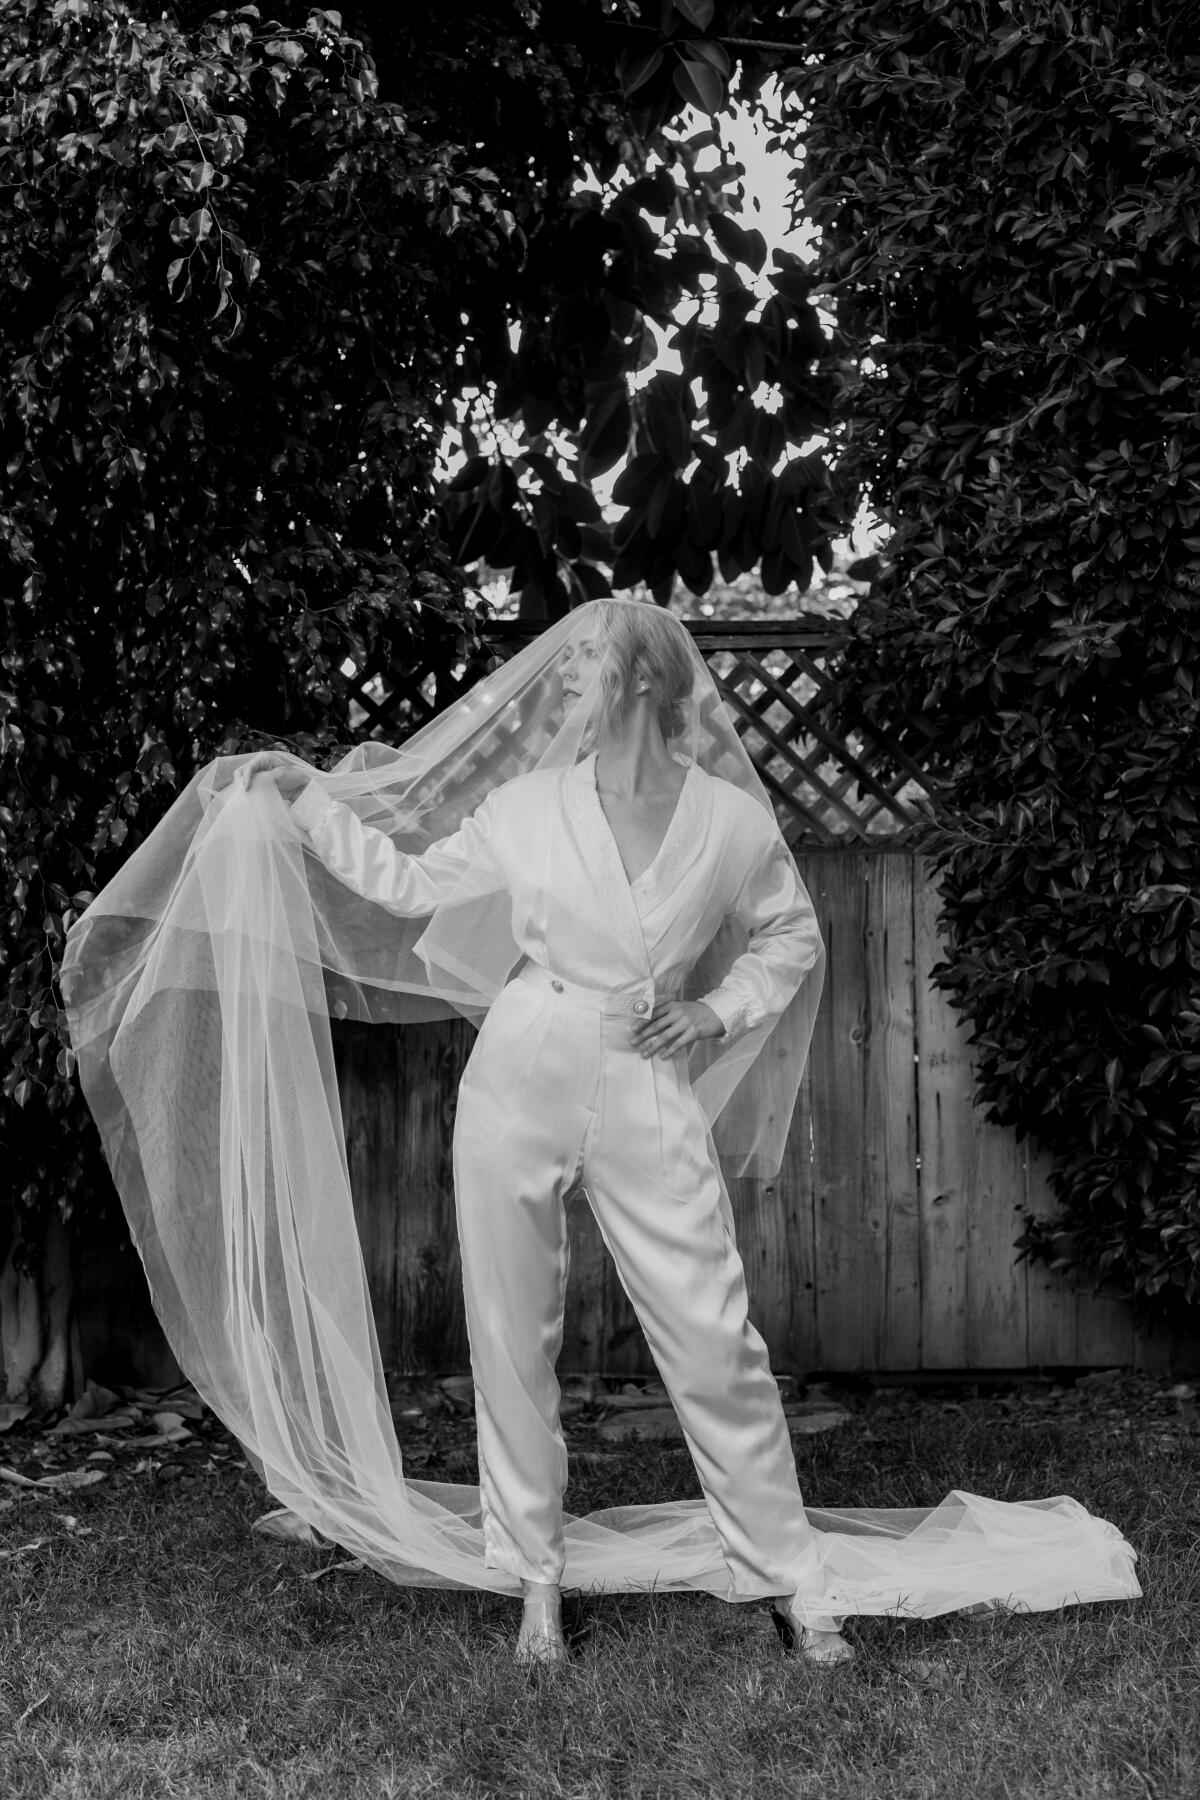 A model wears a white jumpsuit and bridal veil.